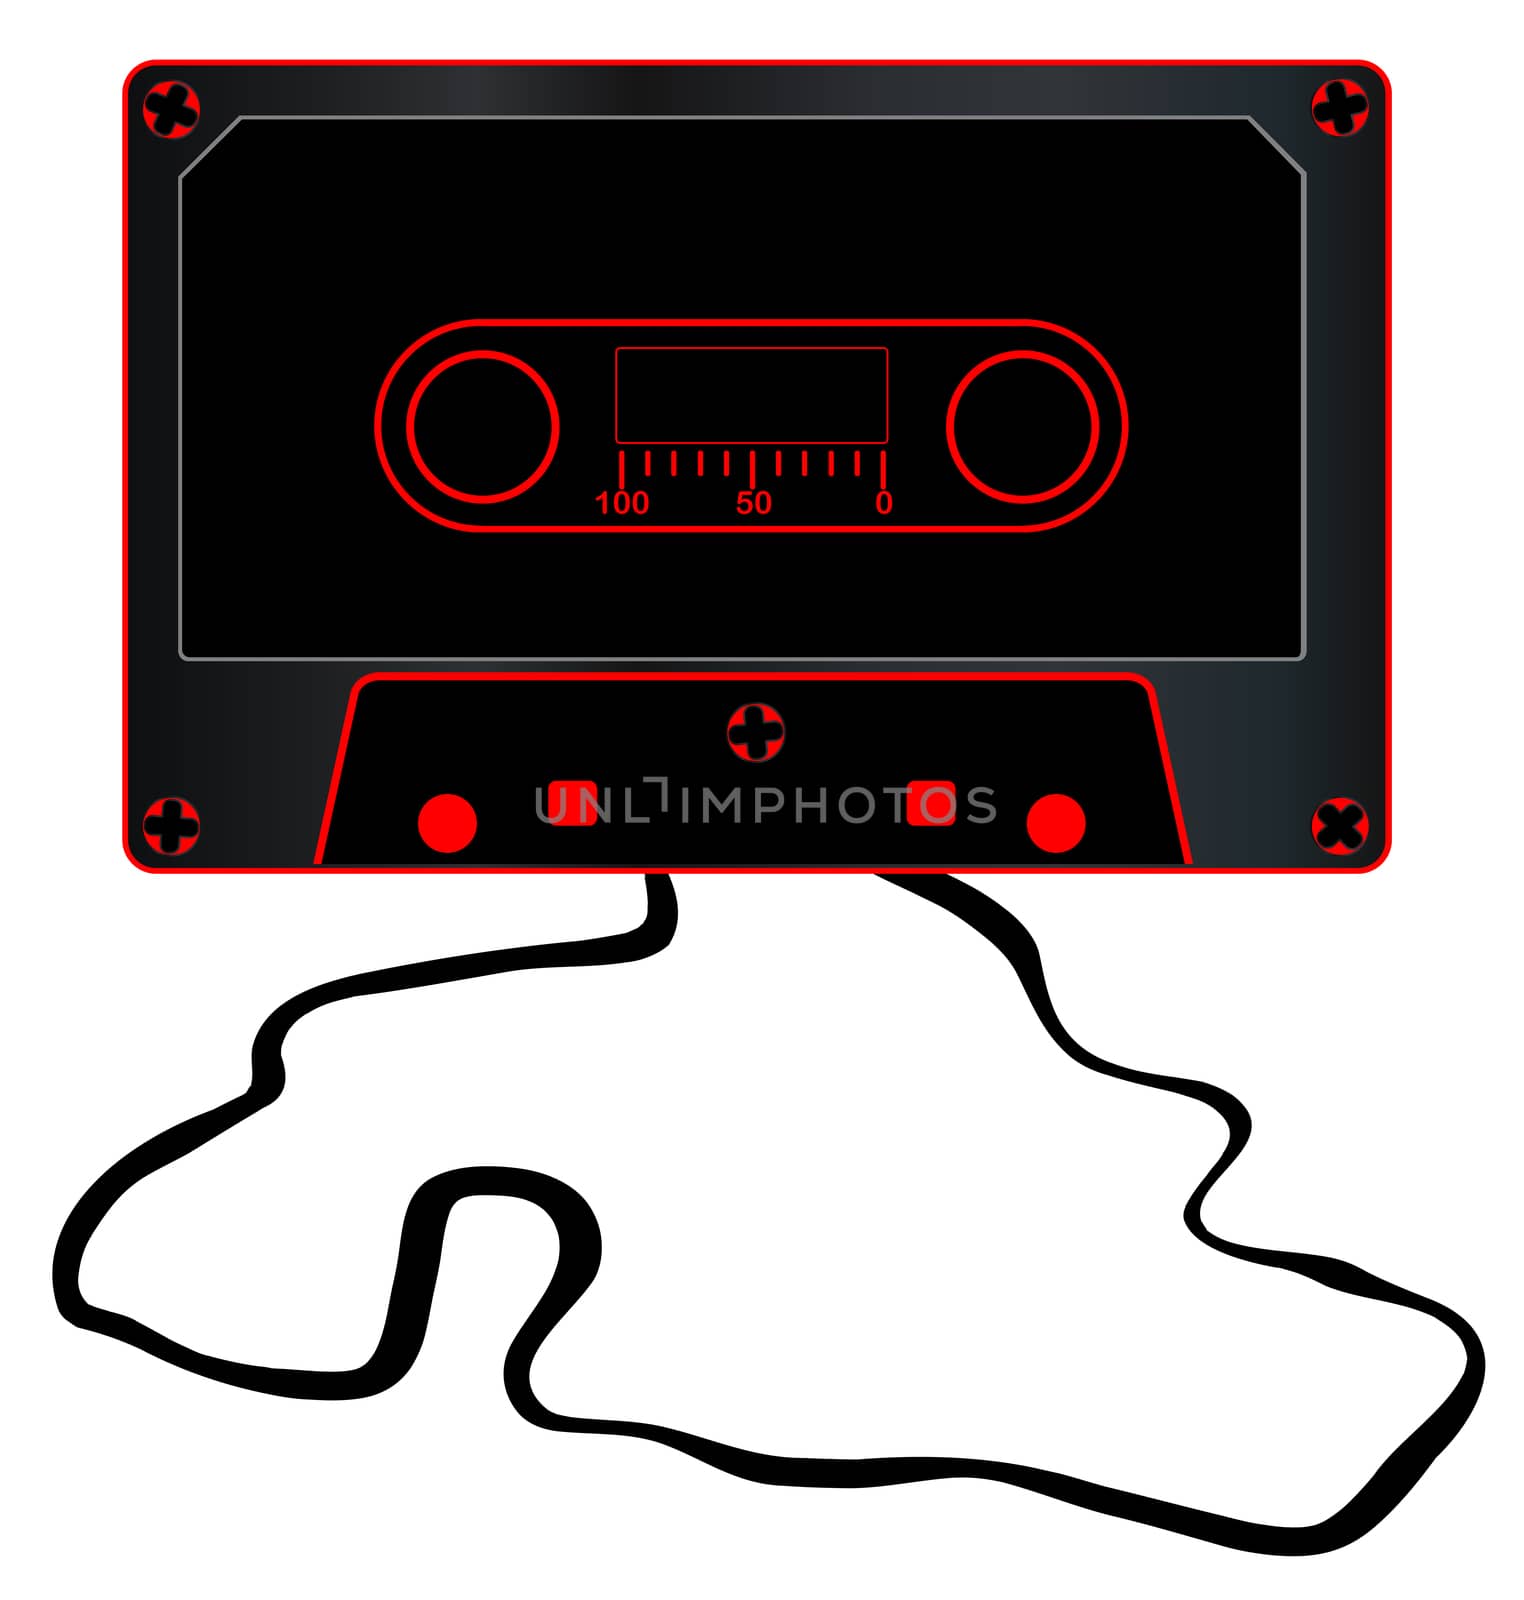 A typical old fashioned audio cassette in black over a white background with unwound tape